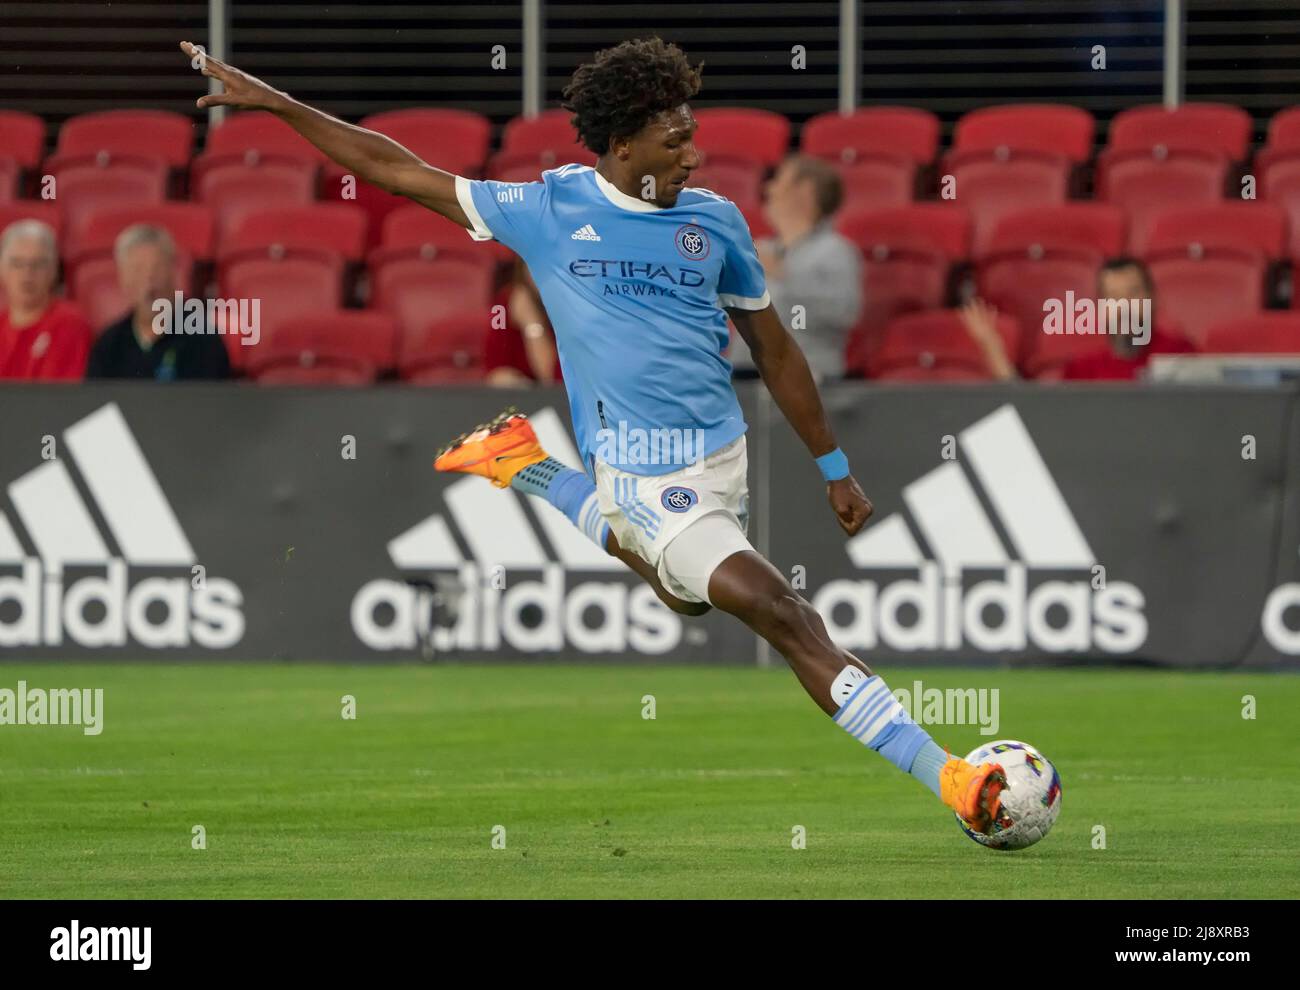 WASHINGTON, DC, USA - 18 MAY 2022: New York City forward Talles Magno (43)  winds up for a shot during a MLS match between DC United and New York City  FC, on